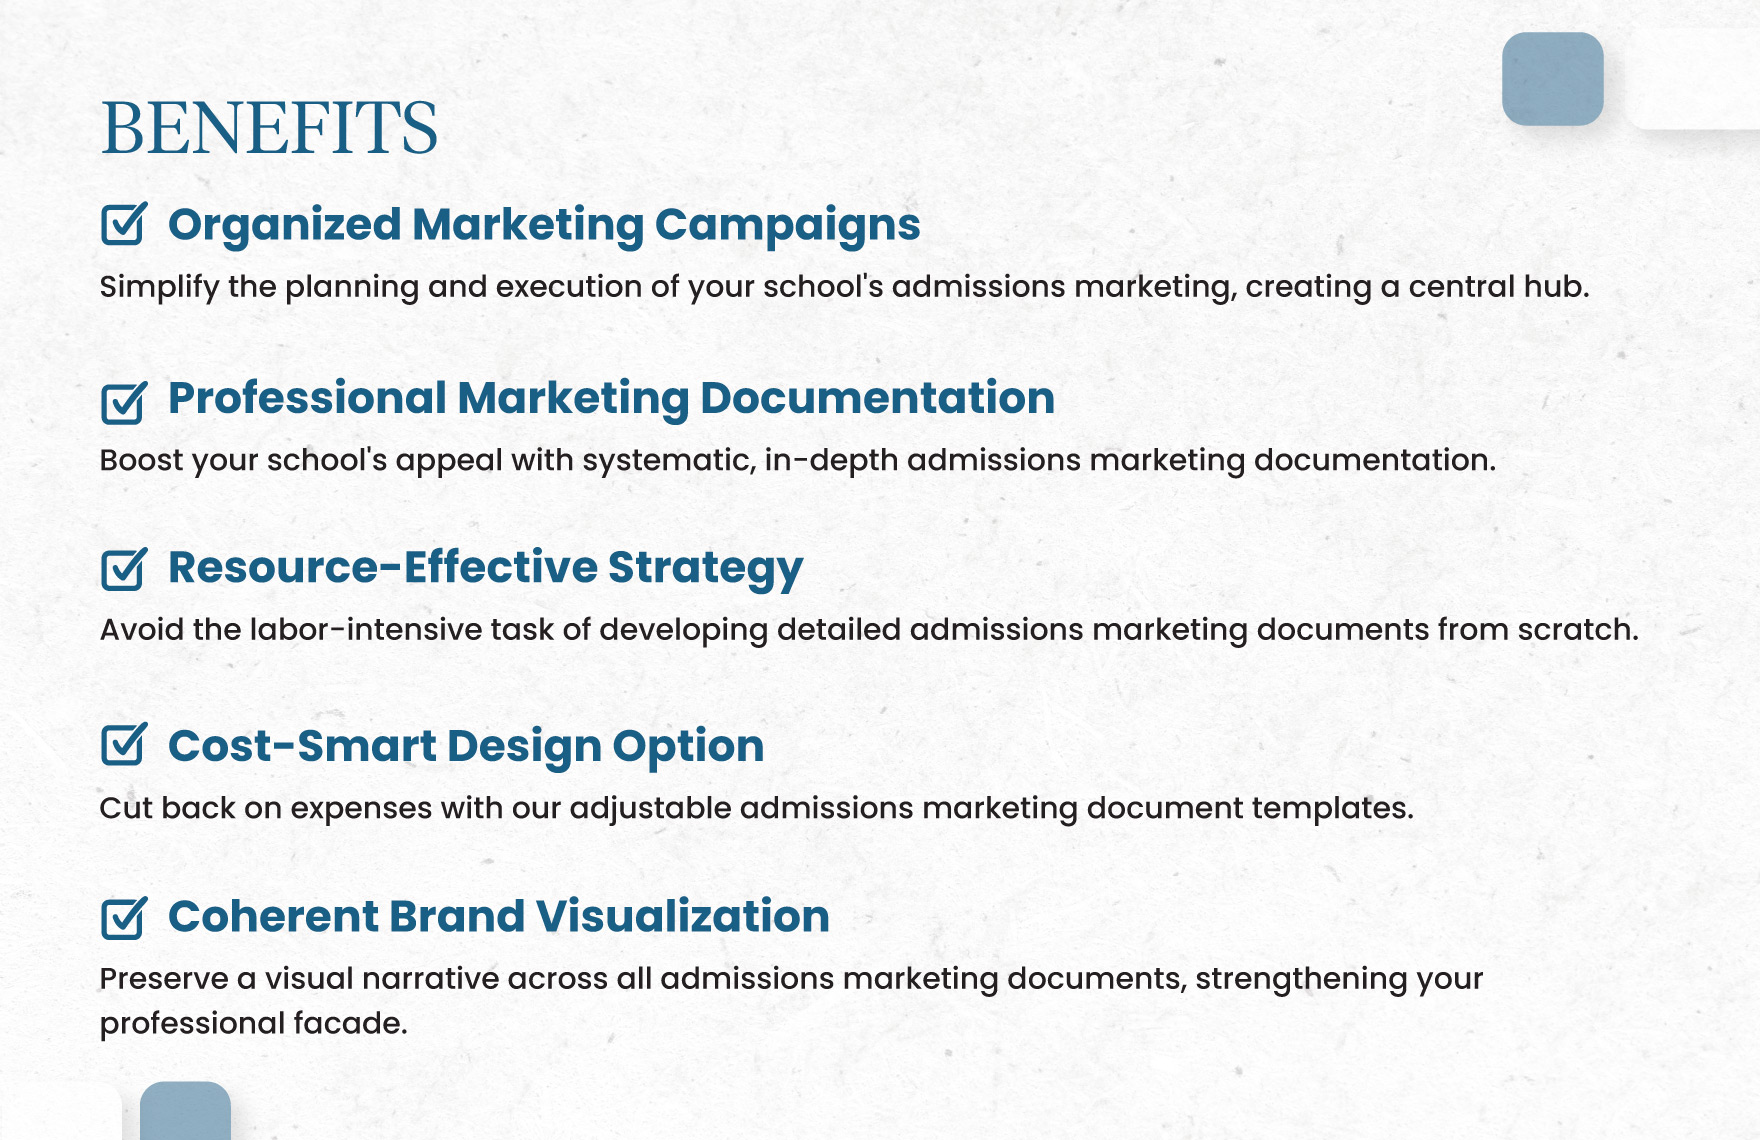 School Admissions Marketing Strategy Template